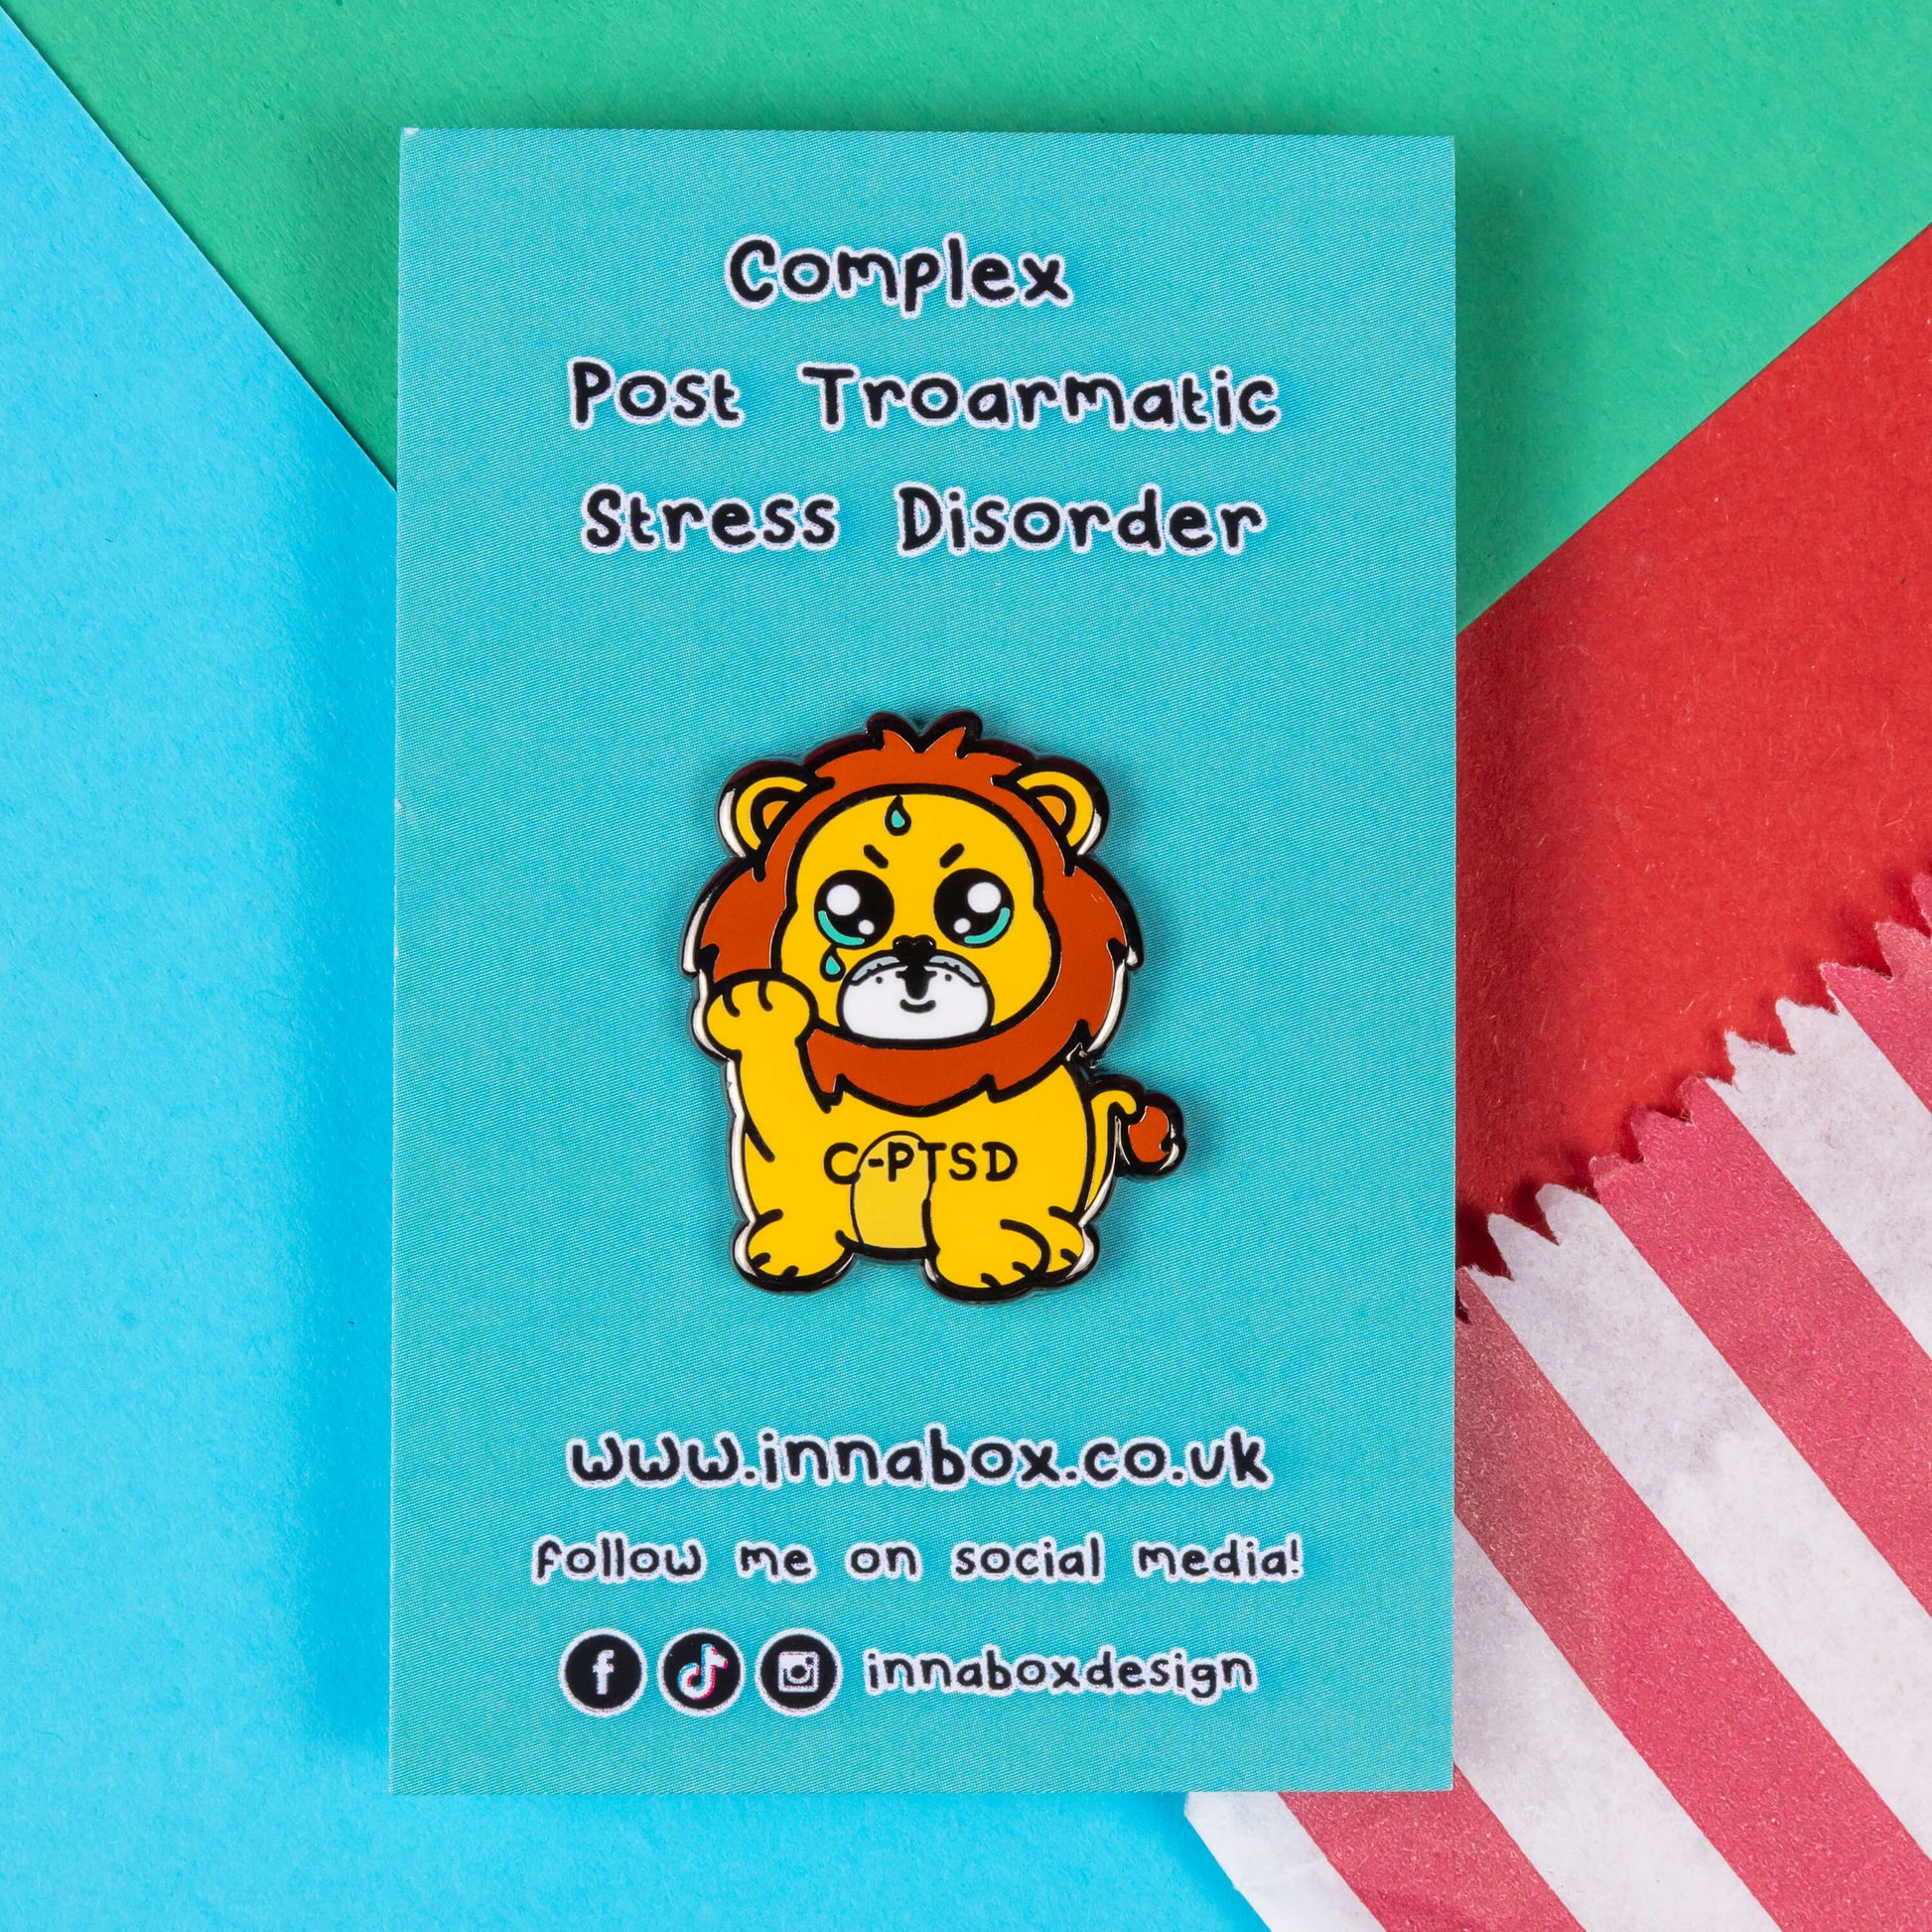 The Complex Post Troarmatic Stress Disorder Lion Enamel Pin - C-PTSD - Complex Post Traumatic Stress Disorder on blue backing card with black text. A yellow crying smiling and sweating male lion with its paw raised in the middle with 'C-PTSD' across its chest. The enamel pin design is raising awareness for complex post traumatic stress disorder.